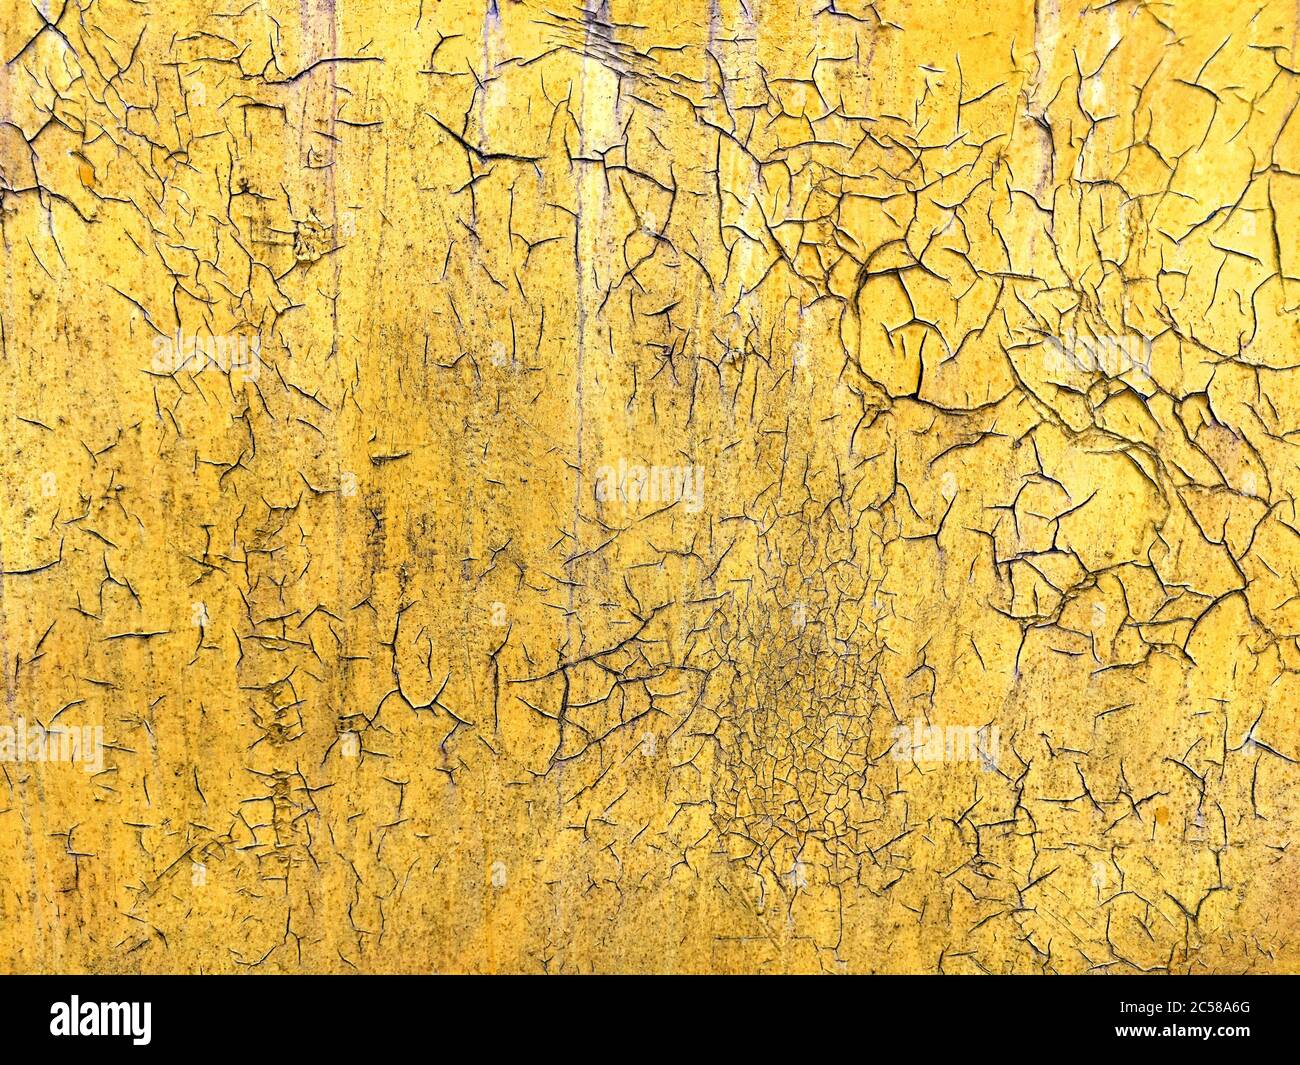 Corroded metal background. Rusted yellow painted metal wall. Rusty metal background with streaks of rust. Rust stains. The metal surface rusted spots. Stock Photo